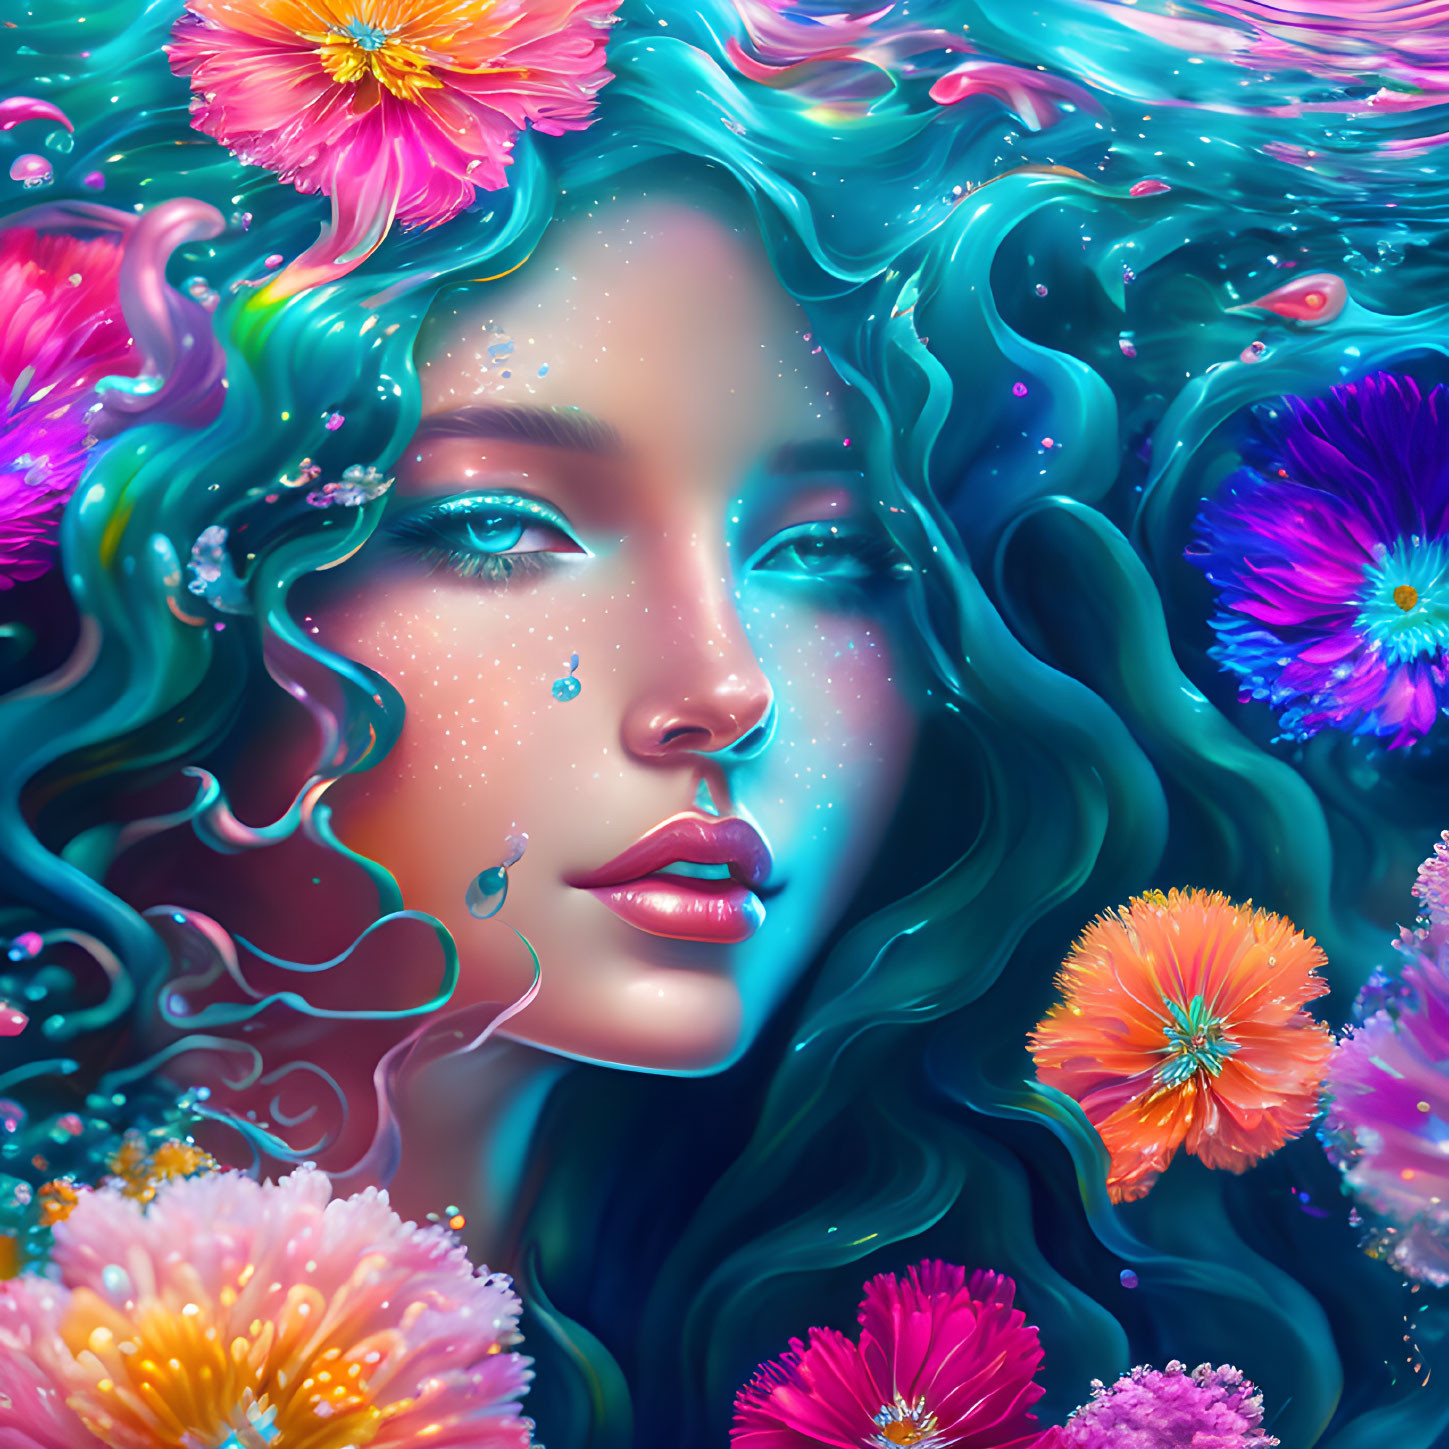 Girl with flowers under water